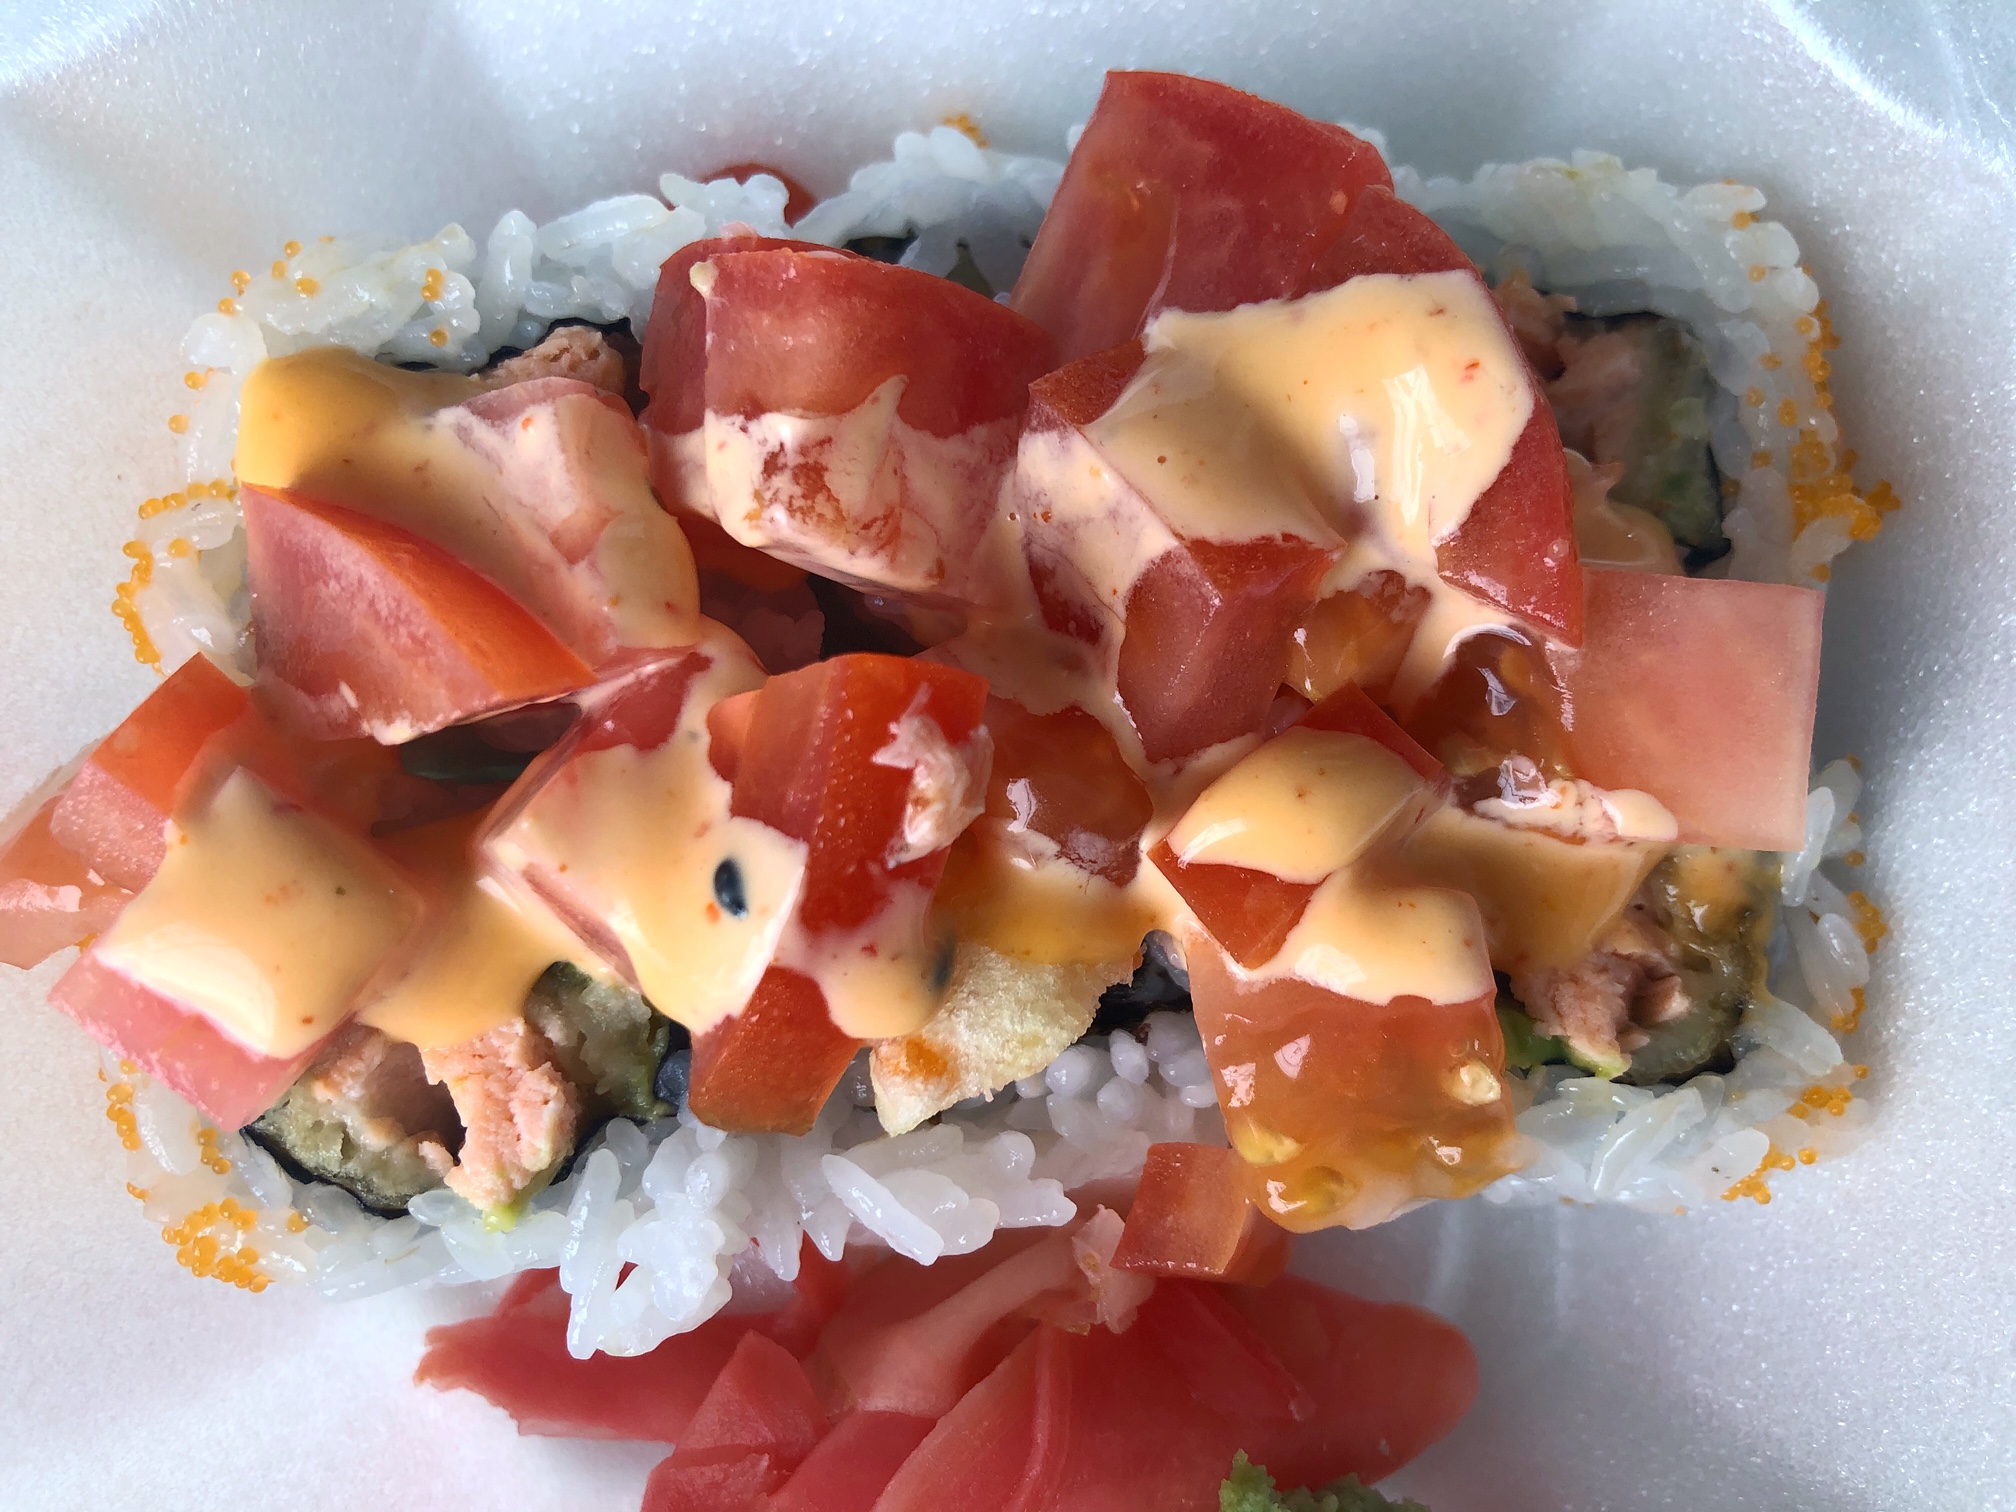 In a white styrofoam container, there is an Alaska Roll from Sushi Kame. The sushi roll is topped with a lot of diced tomato plus a generous drizzle of an orange sauce. Photo by Alyssa Buckley.